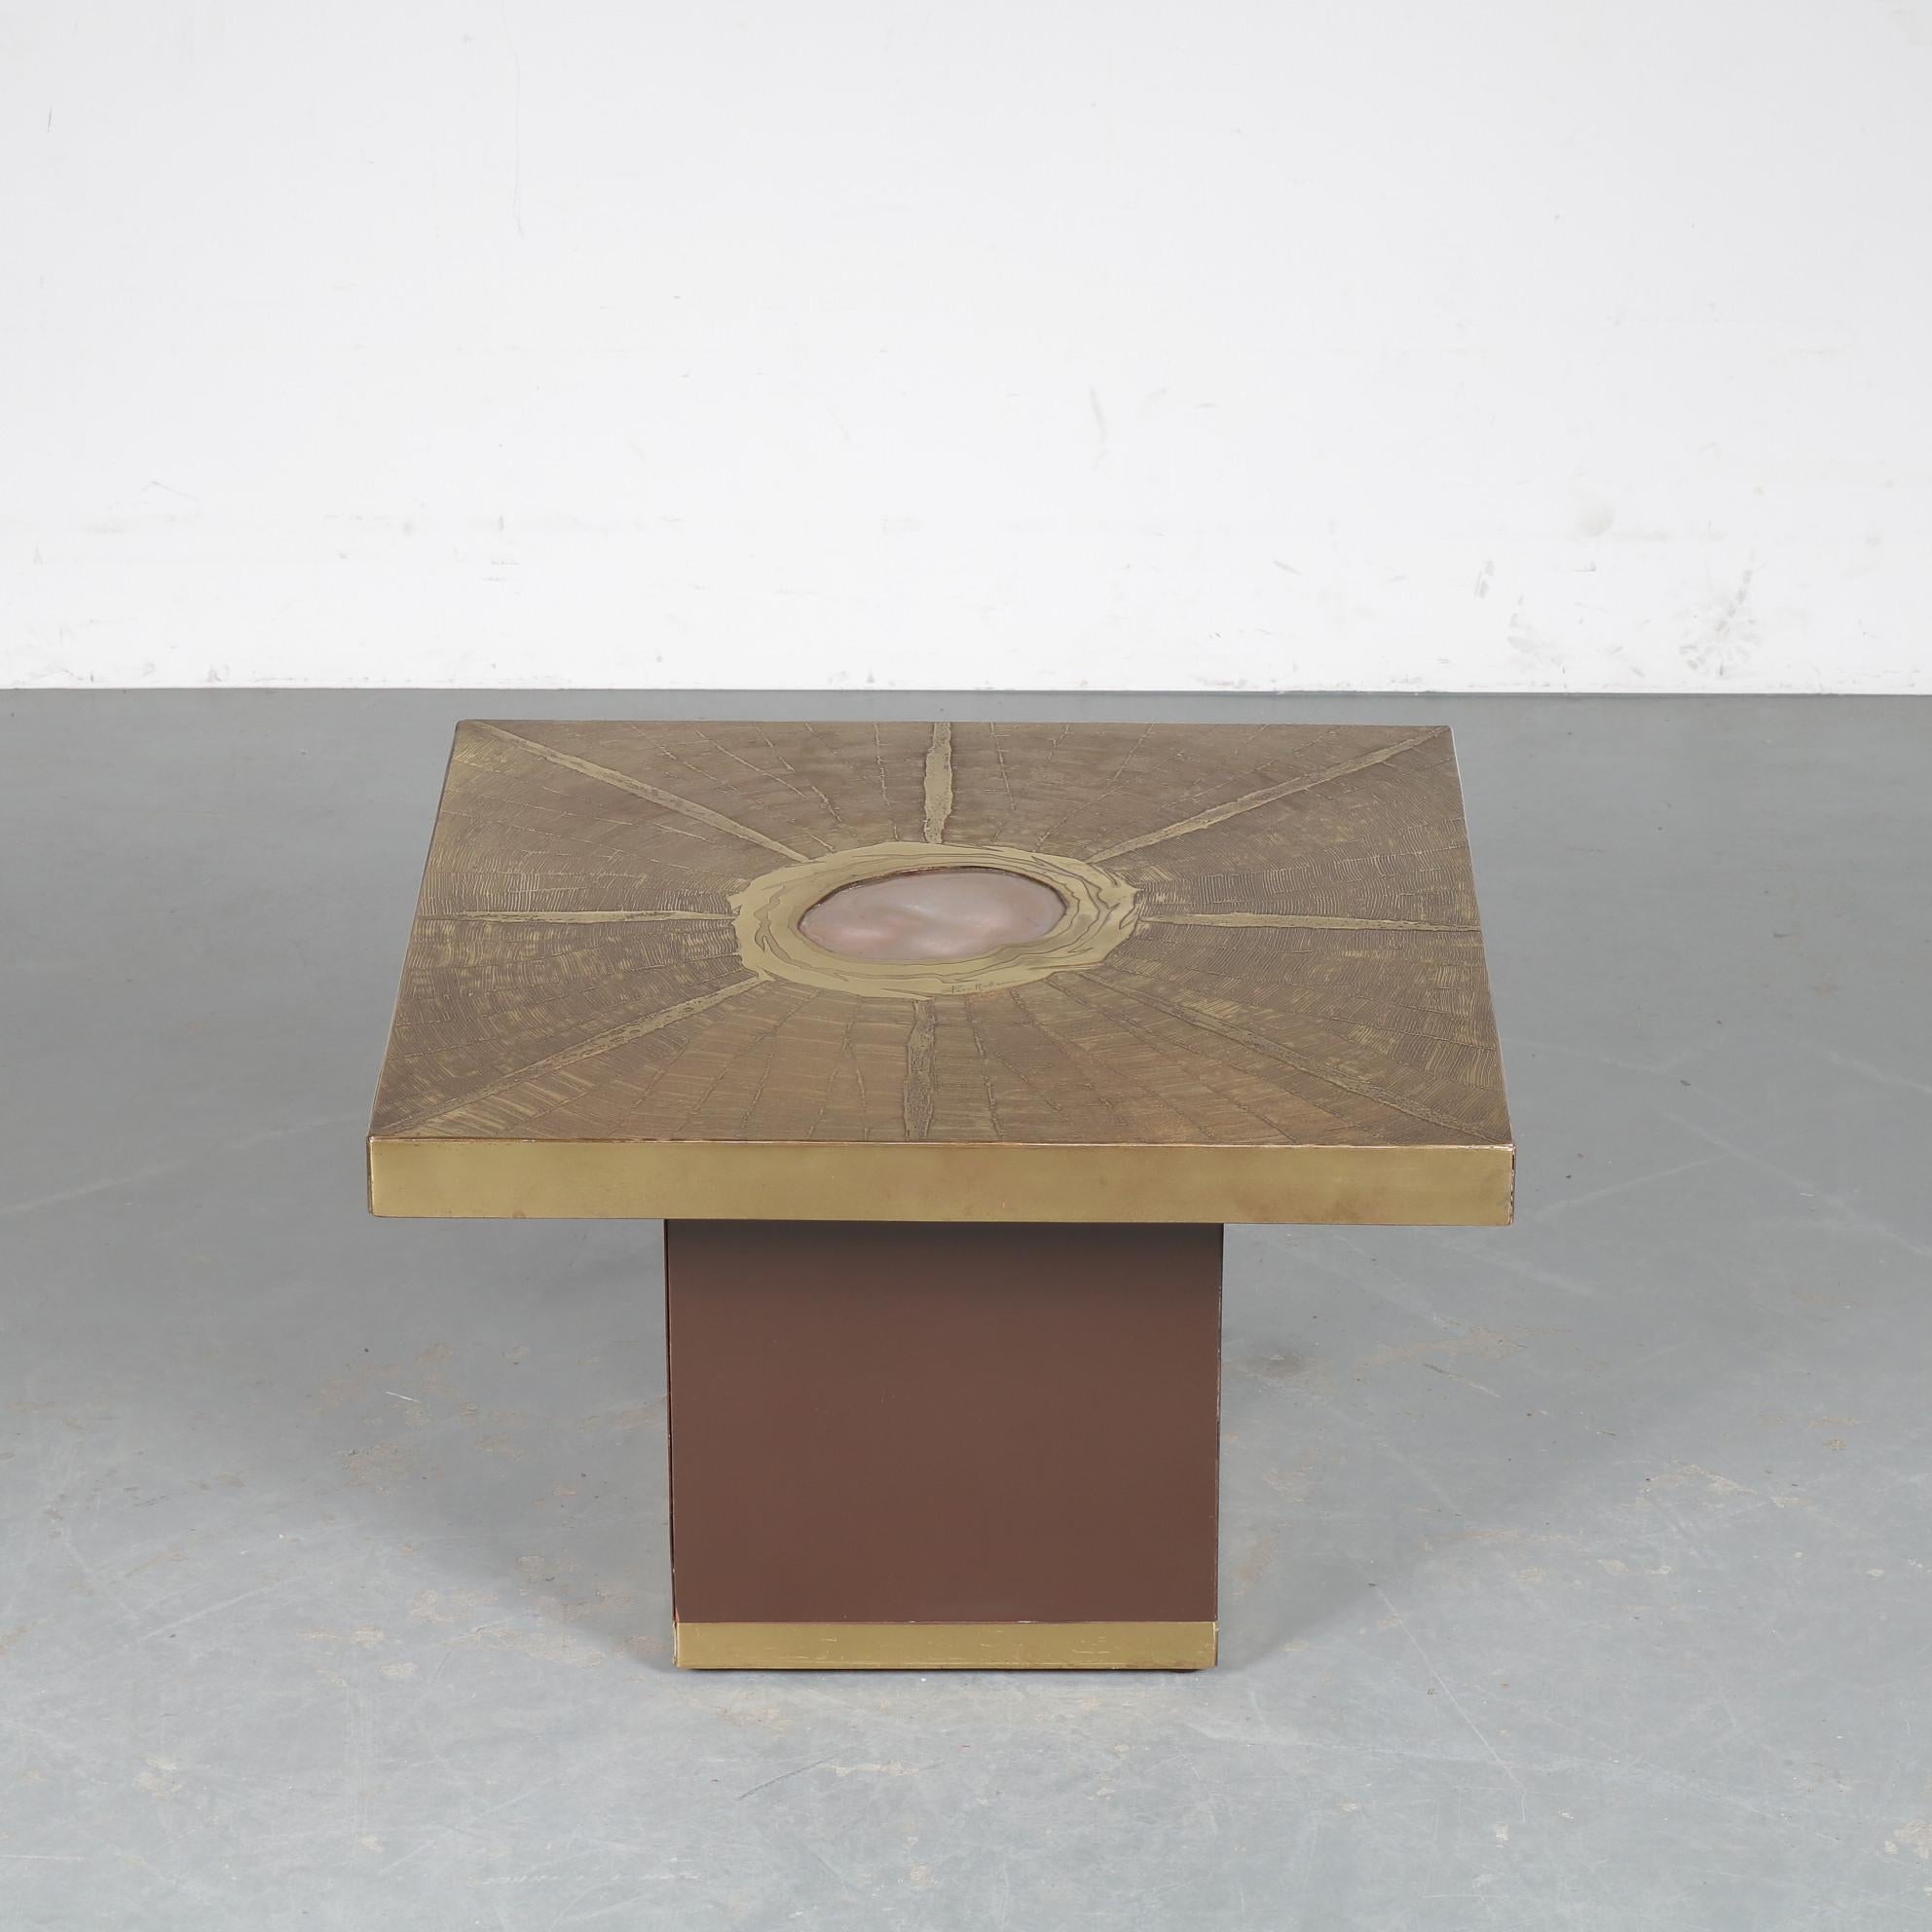 Square Coffee Table by Paco Rabanne for Lova Creation, Belgium 1970 In Good Condition For Sale In Amsterdam, NL